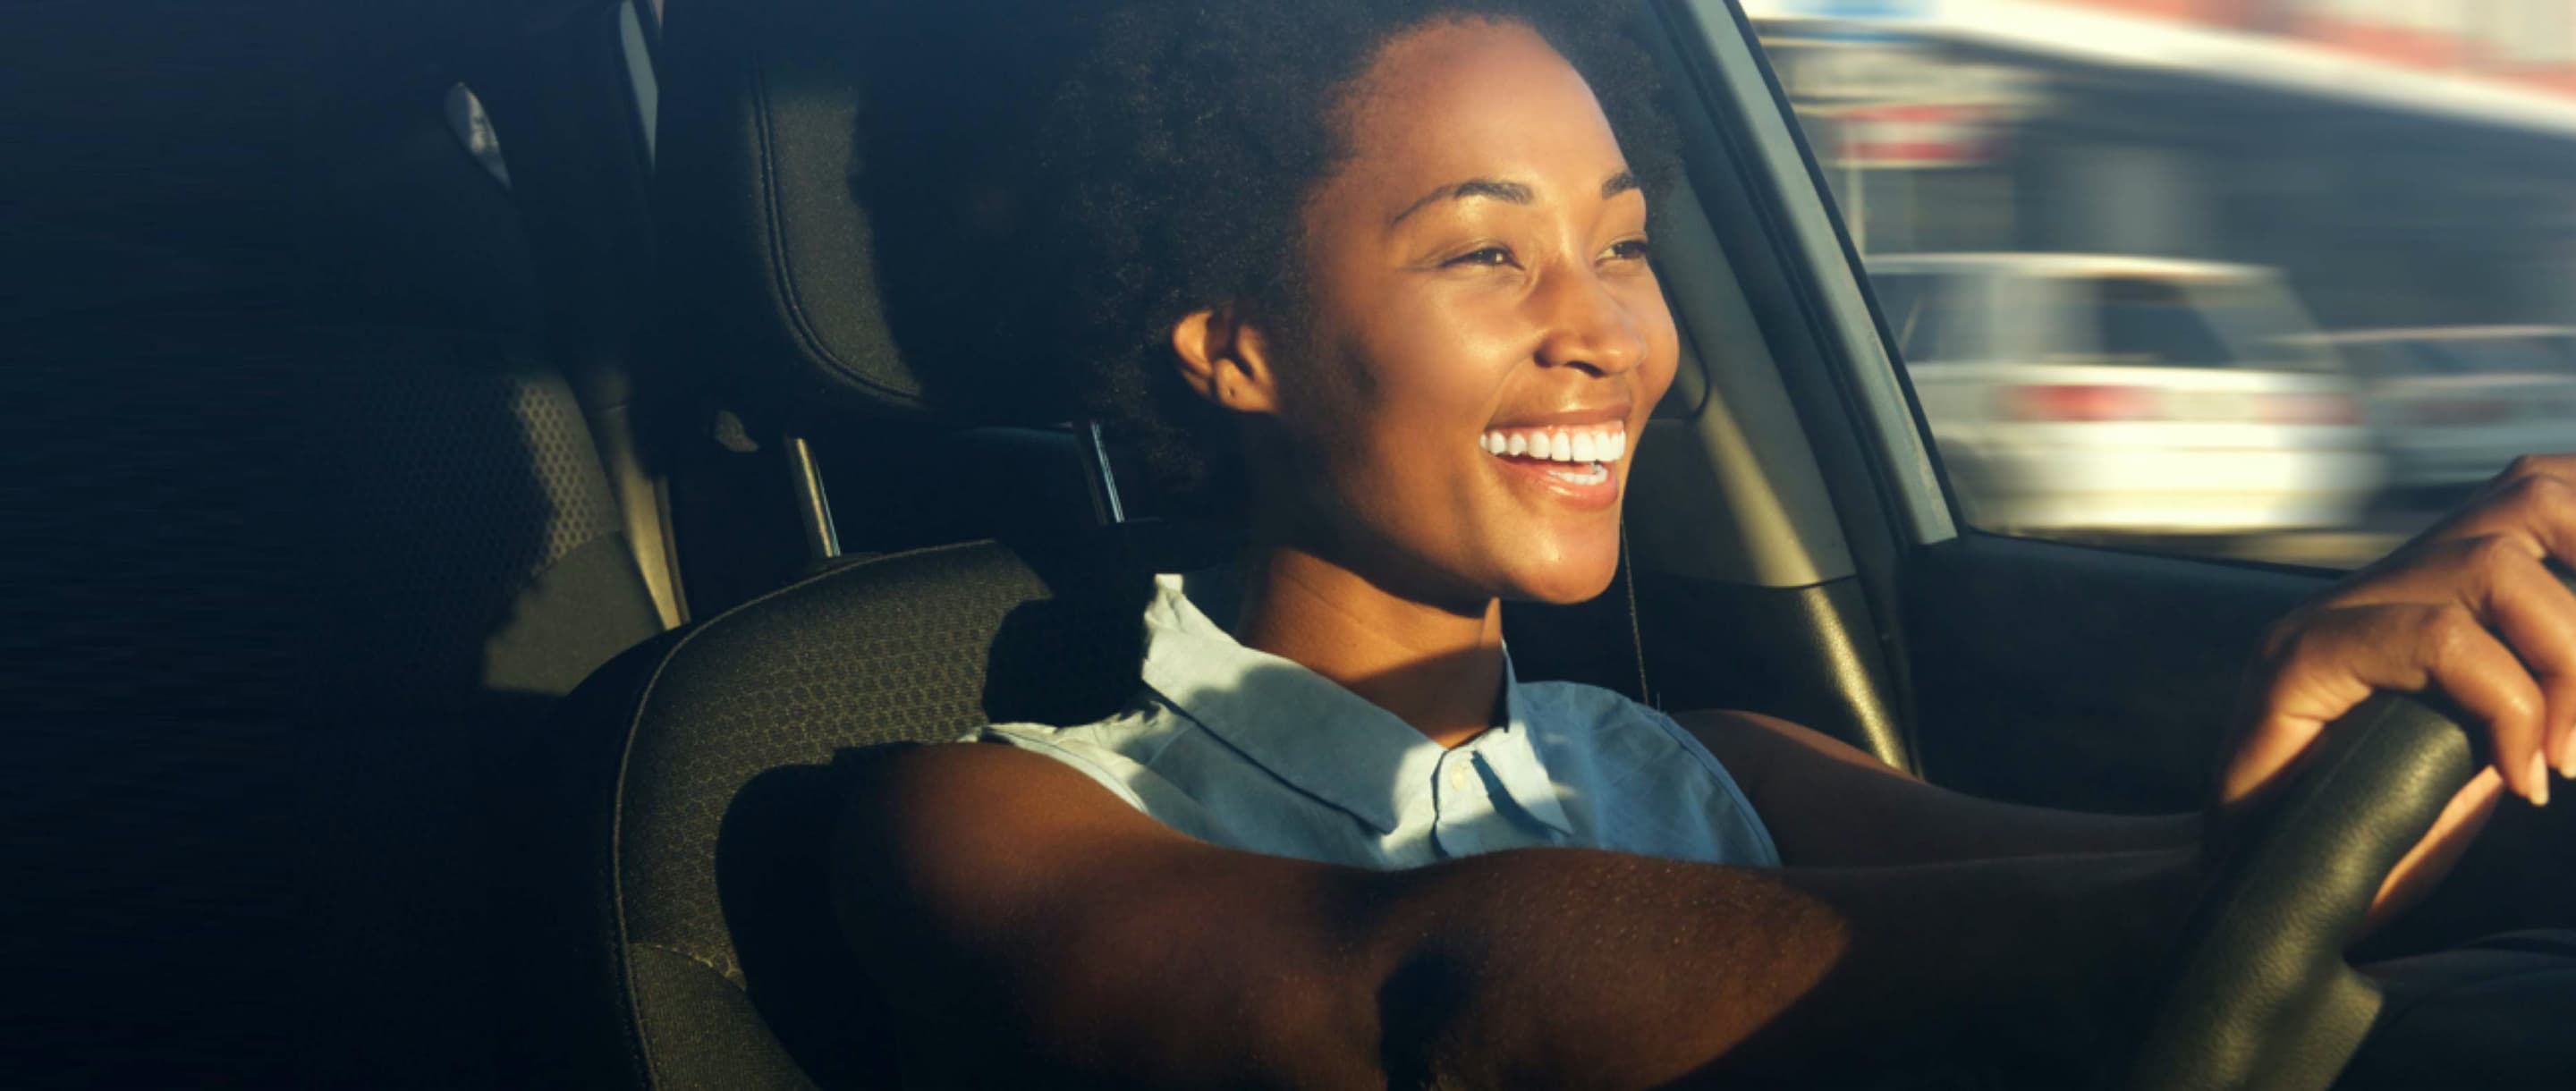 Woman driving car while smiling